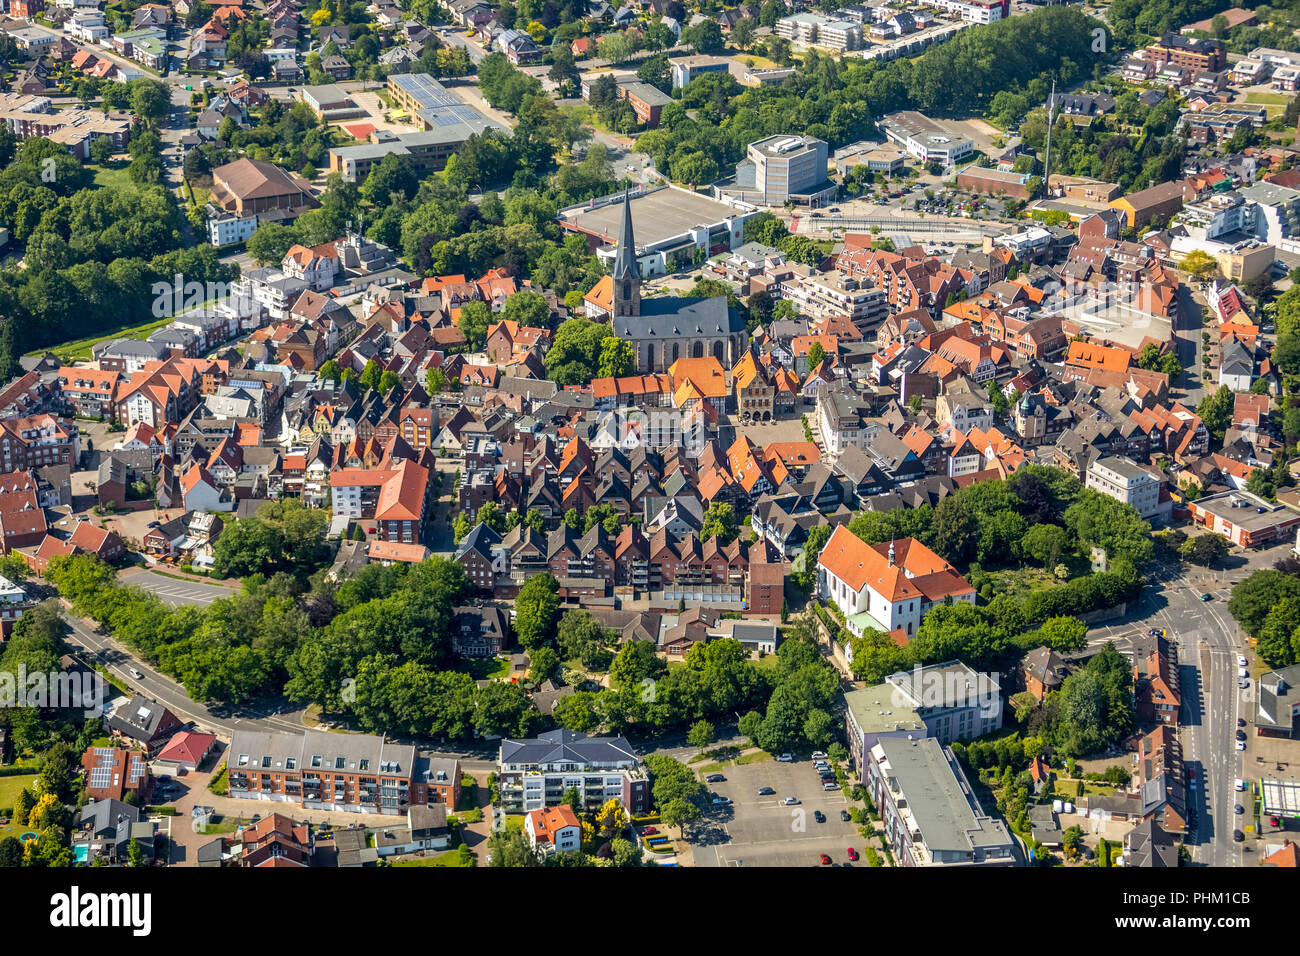 Aerial view, city centre of Werne, St. Christophorus church, market, cemetery, city, city centre, overview, Werne, Ruhr area, North Rhine-Westphalia,  Stock Photo